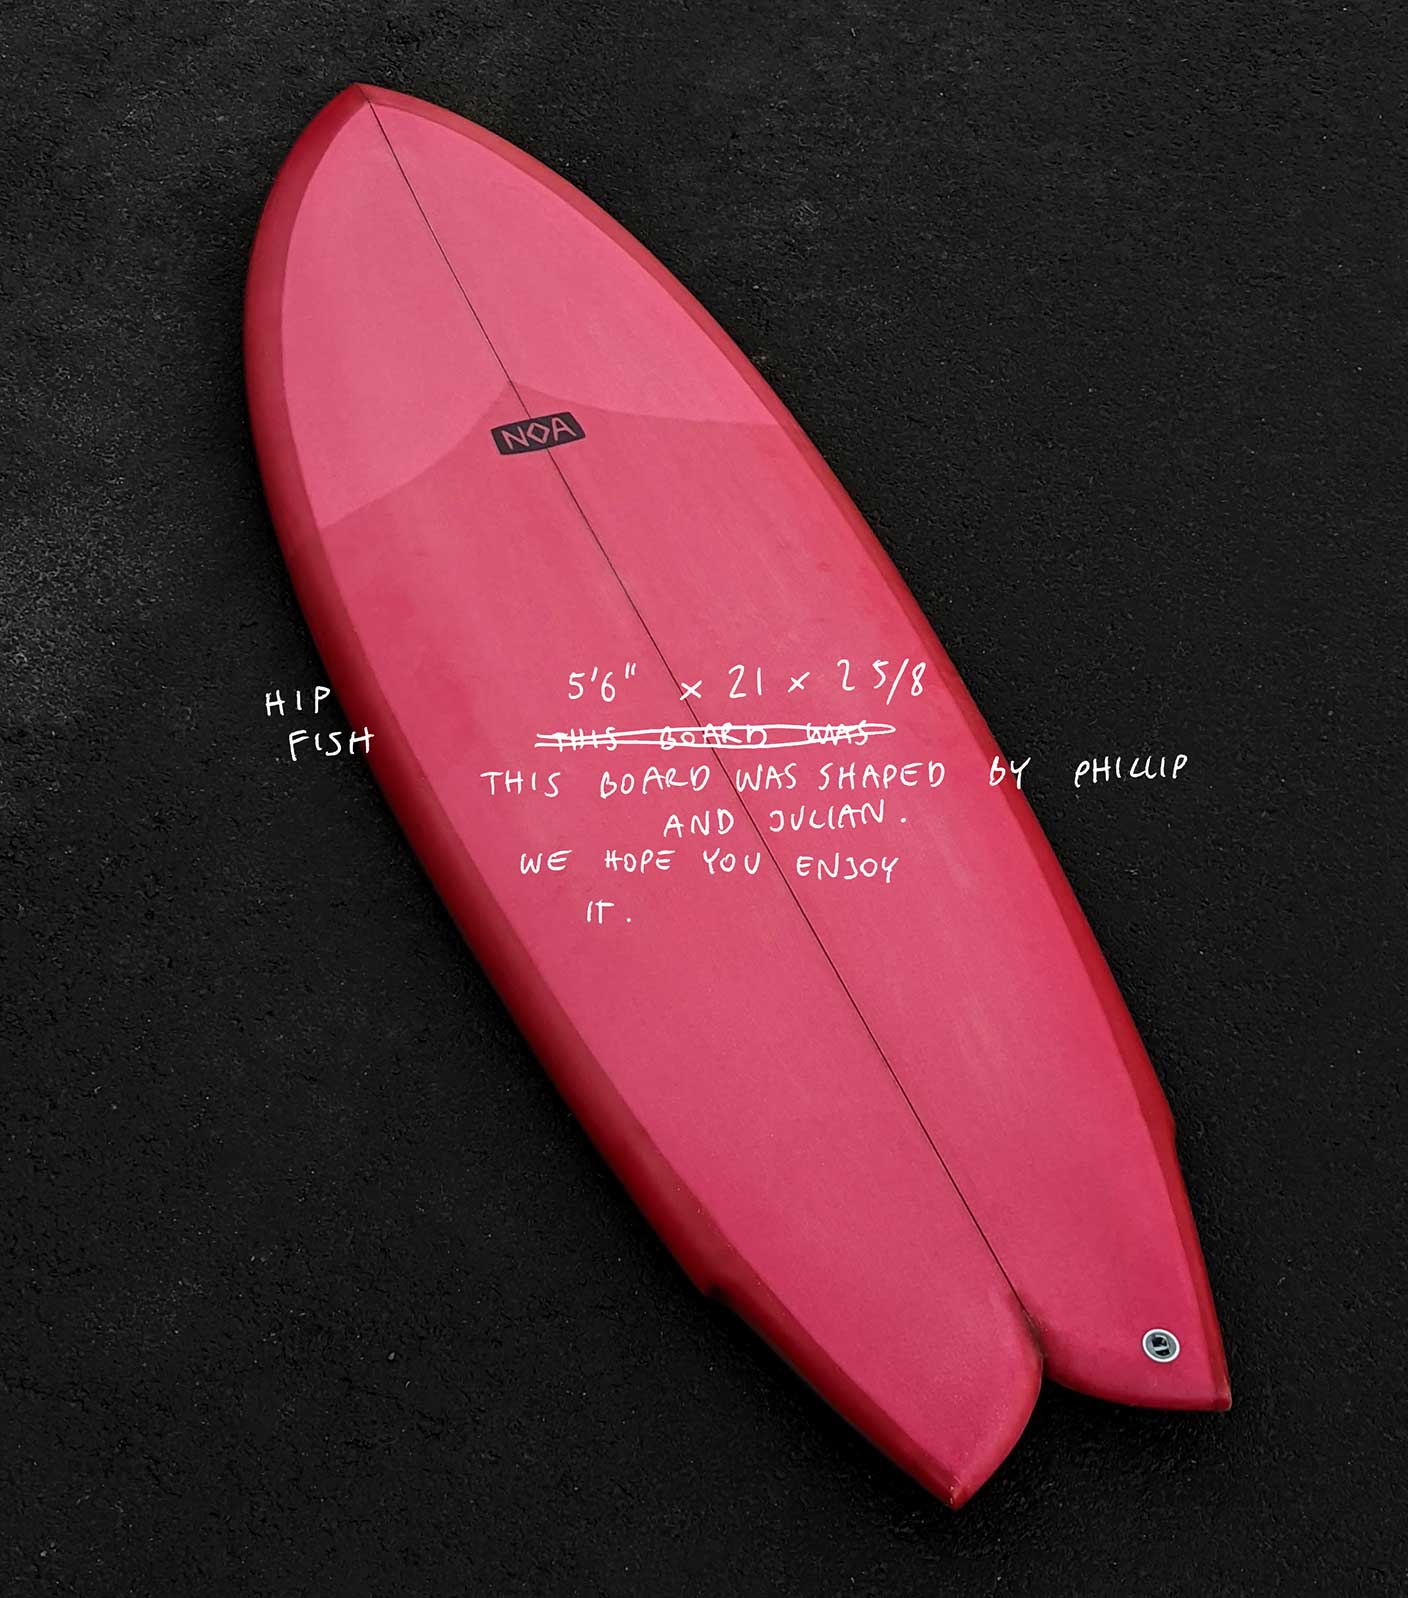 A red surfboard in fish shape lying on black asphalt floor with white descriptive text written on the photo that says 